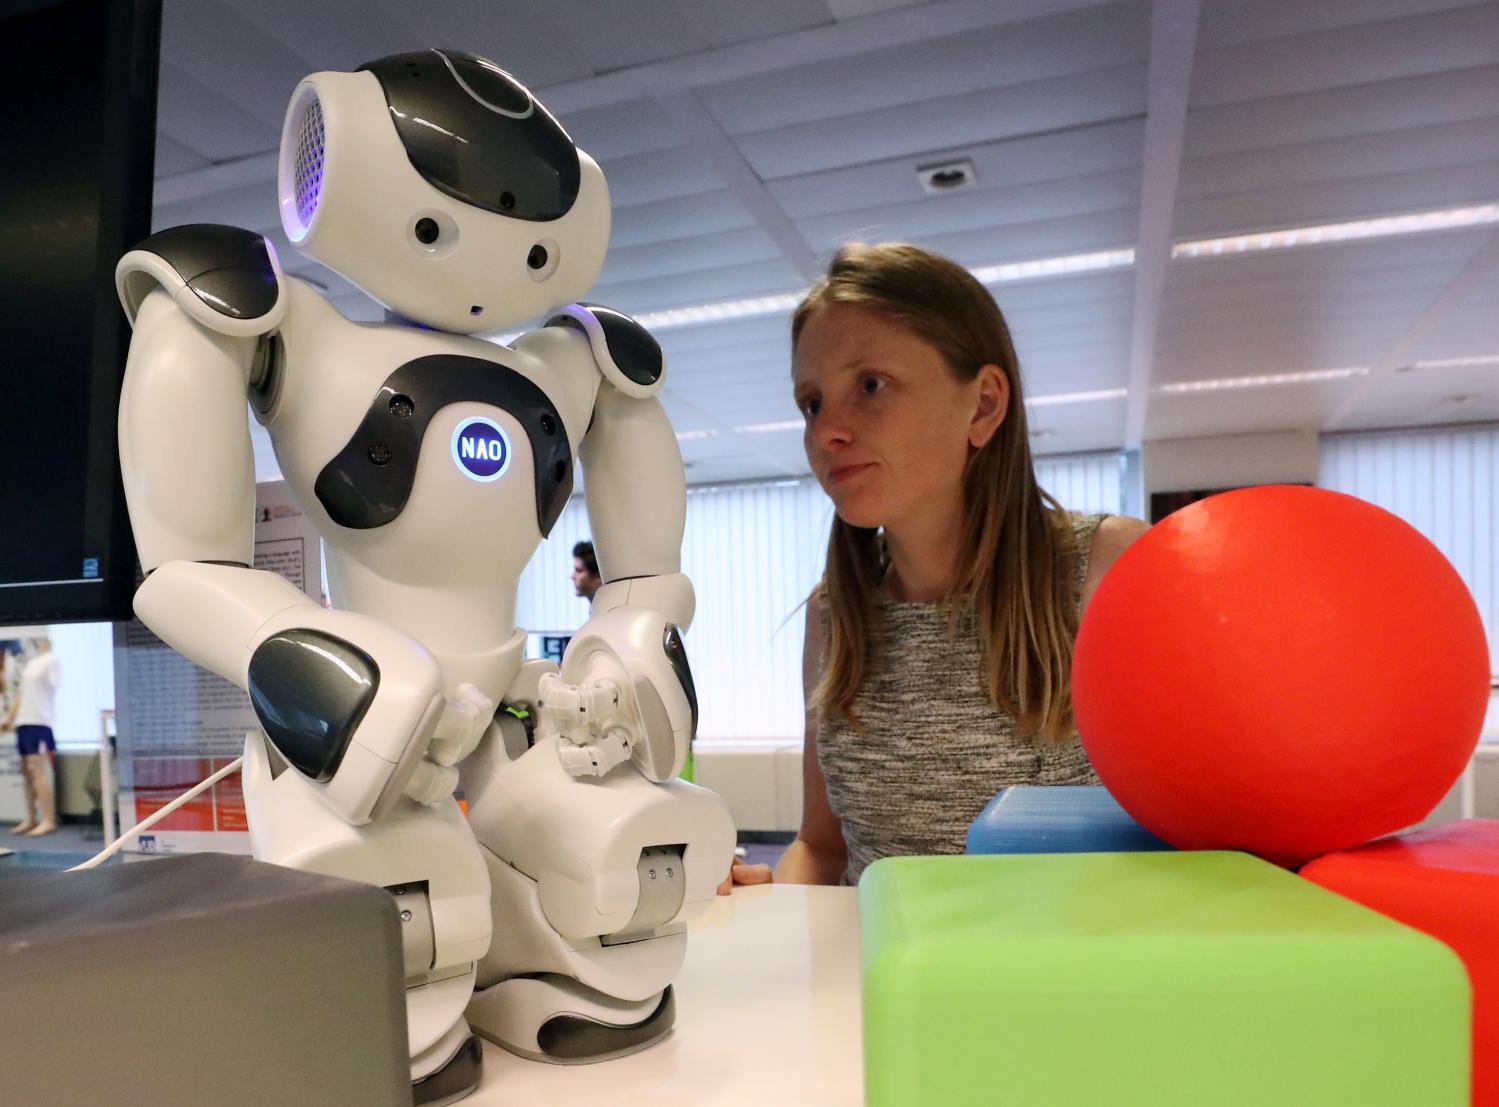 A researcher looks at a small humanoid robot standing among red and green plastic objects.